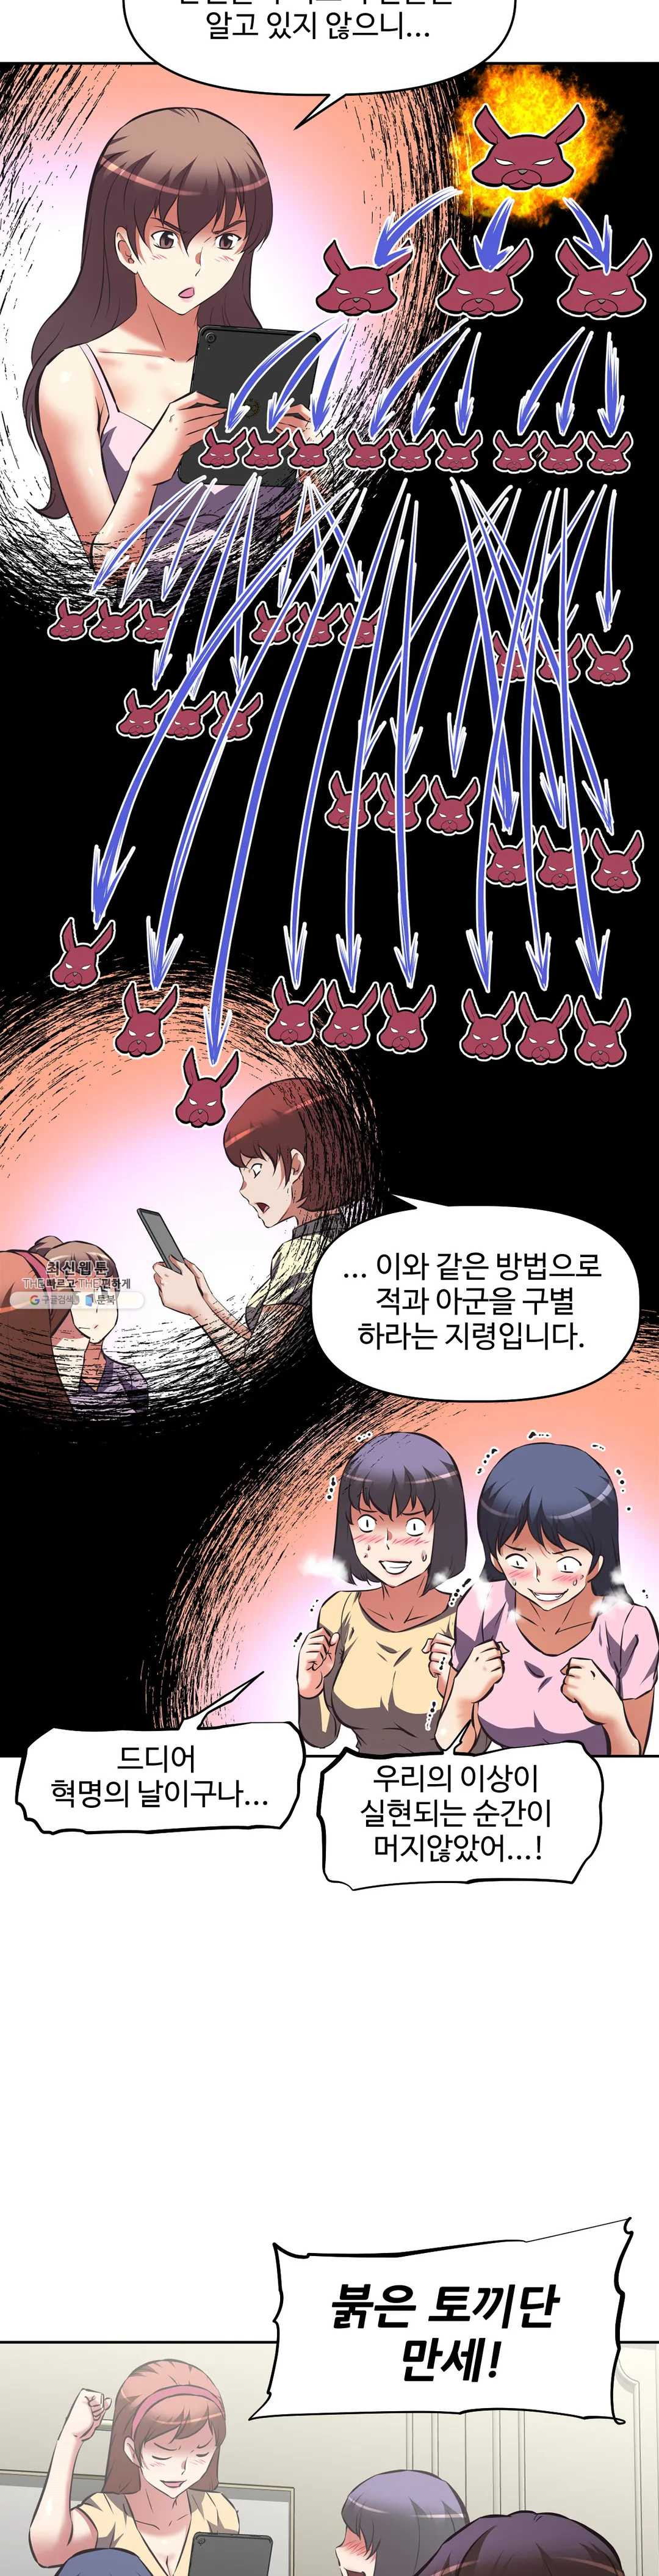 The Girls’ Nest Raw - Chapter 47 Page 3